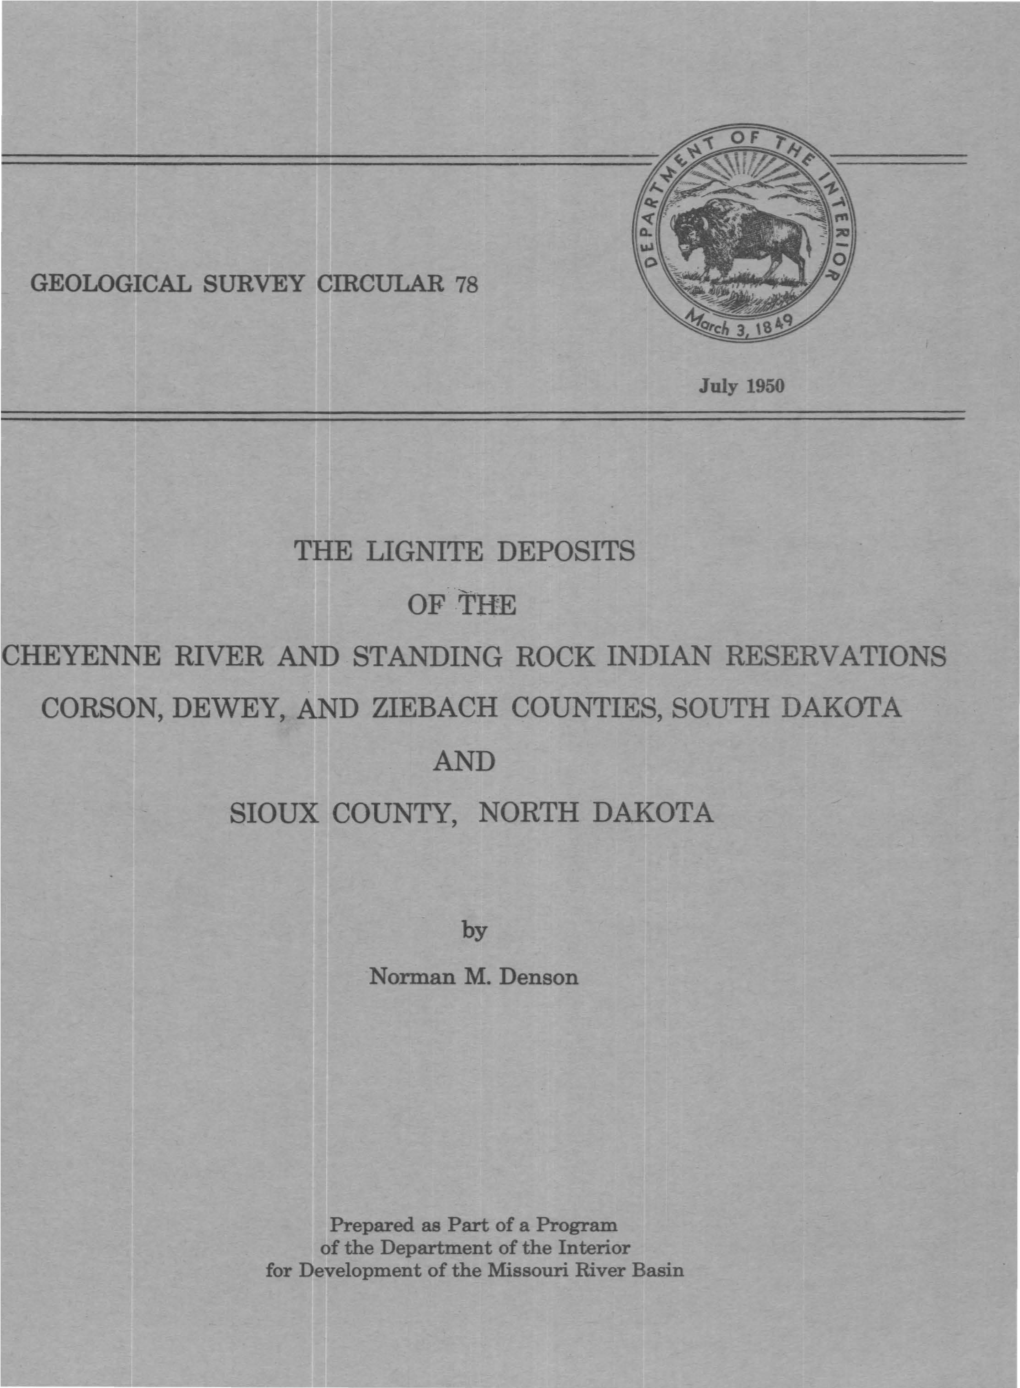 The Lignite Deposits of the Cheyenne River and Standing Rock Indian Reservations Corson, Dewey, and Ziebach Counties, South Dakota and Sioux County, North Dakota